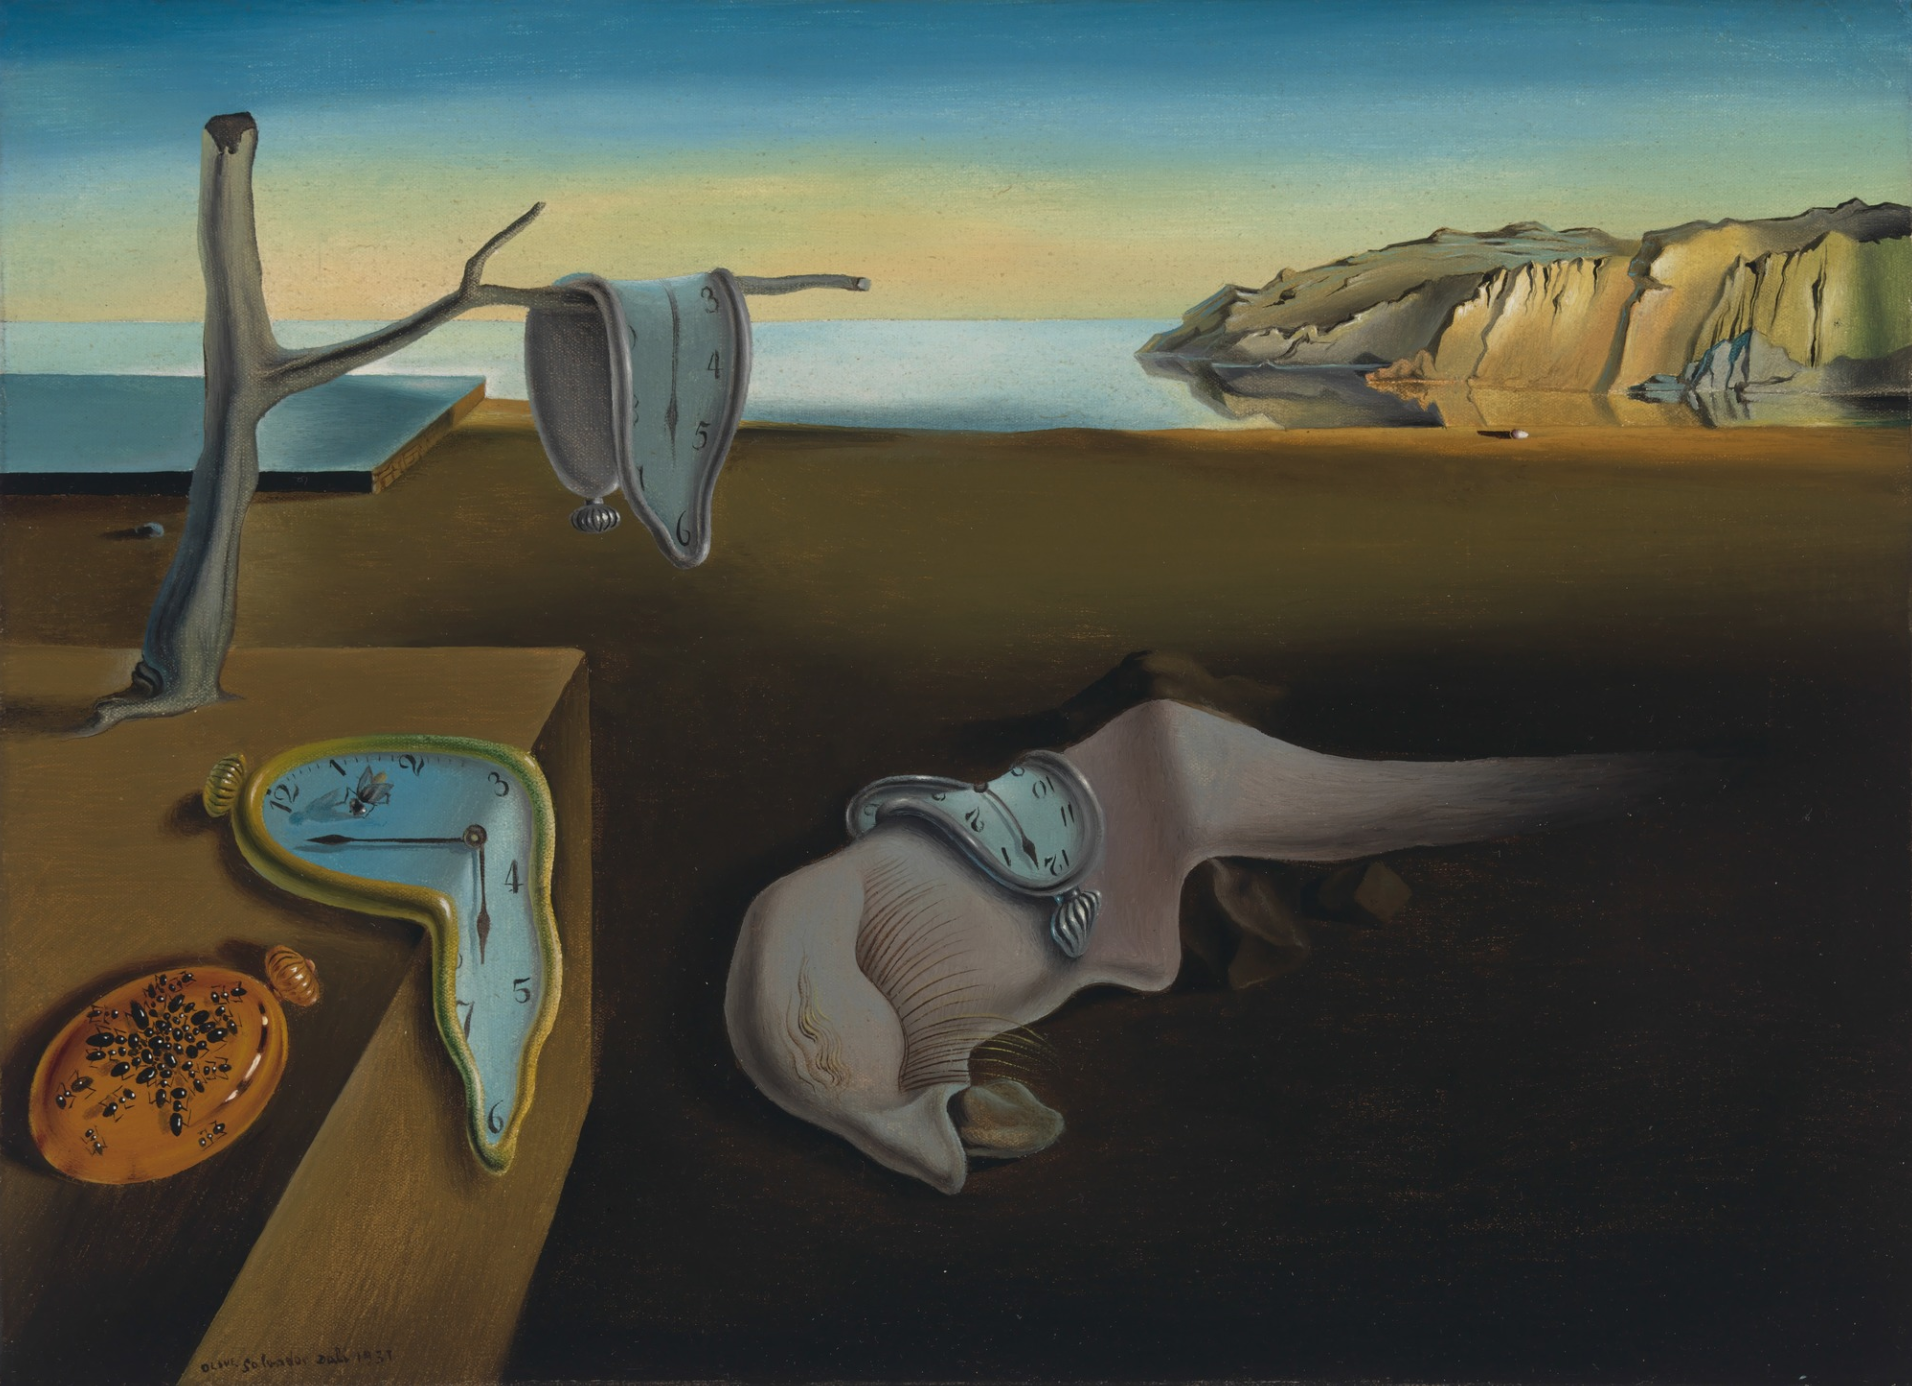 https://media.thisisgallery.com/wp-content/uploads/2018/12/salvadordali_01.png